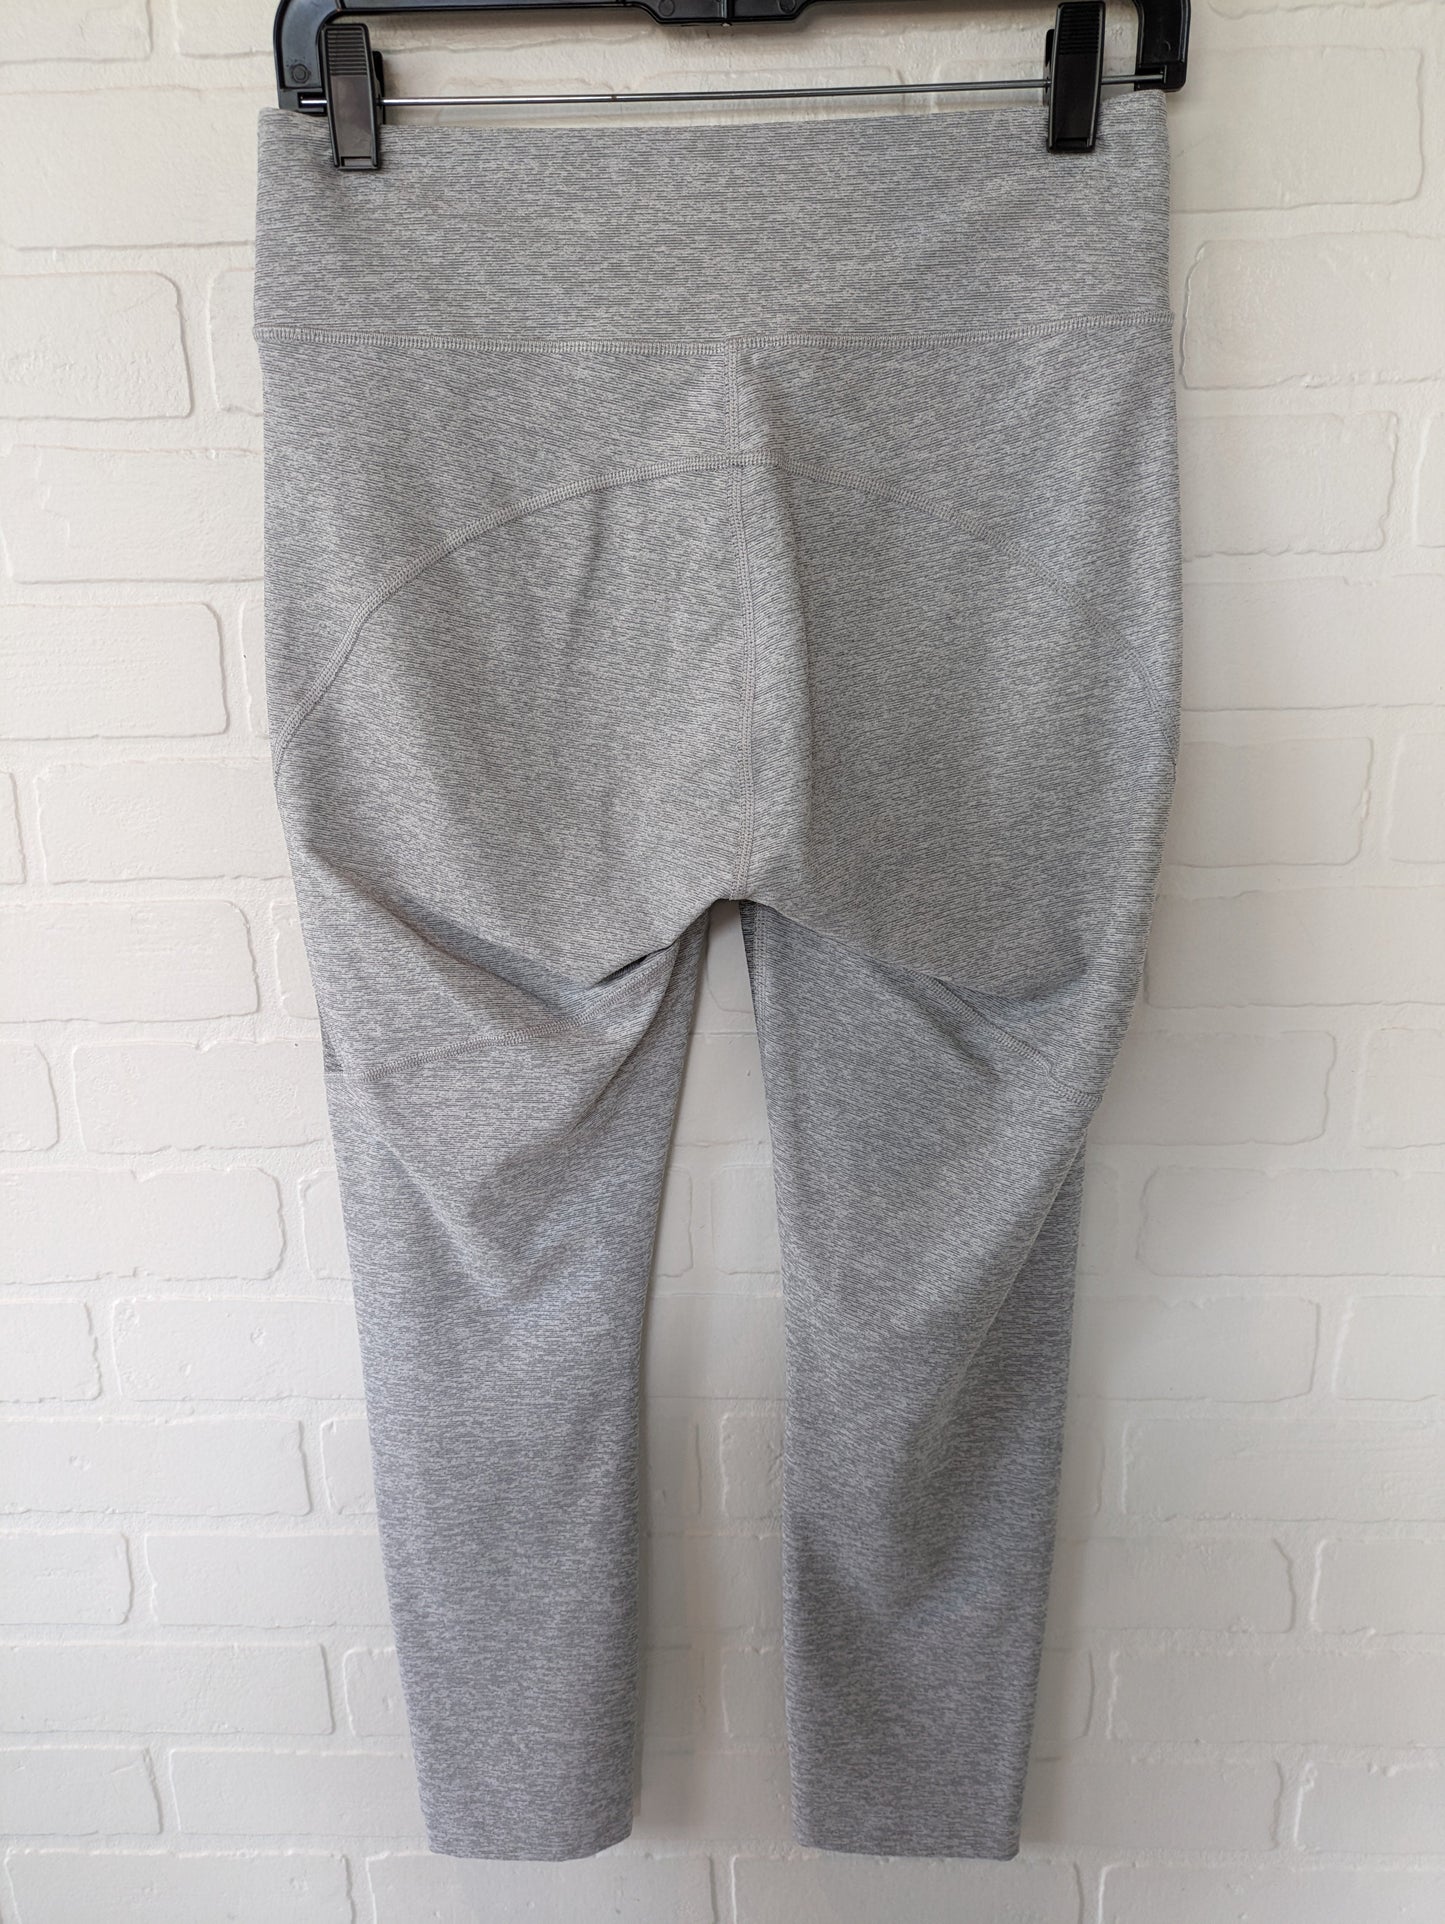 Grey Athletic Leggings Outdoor Voices, Size 8